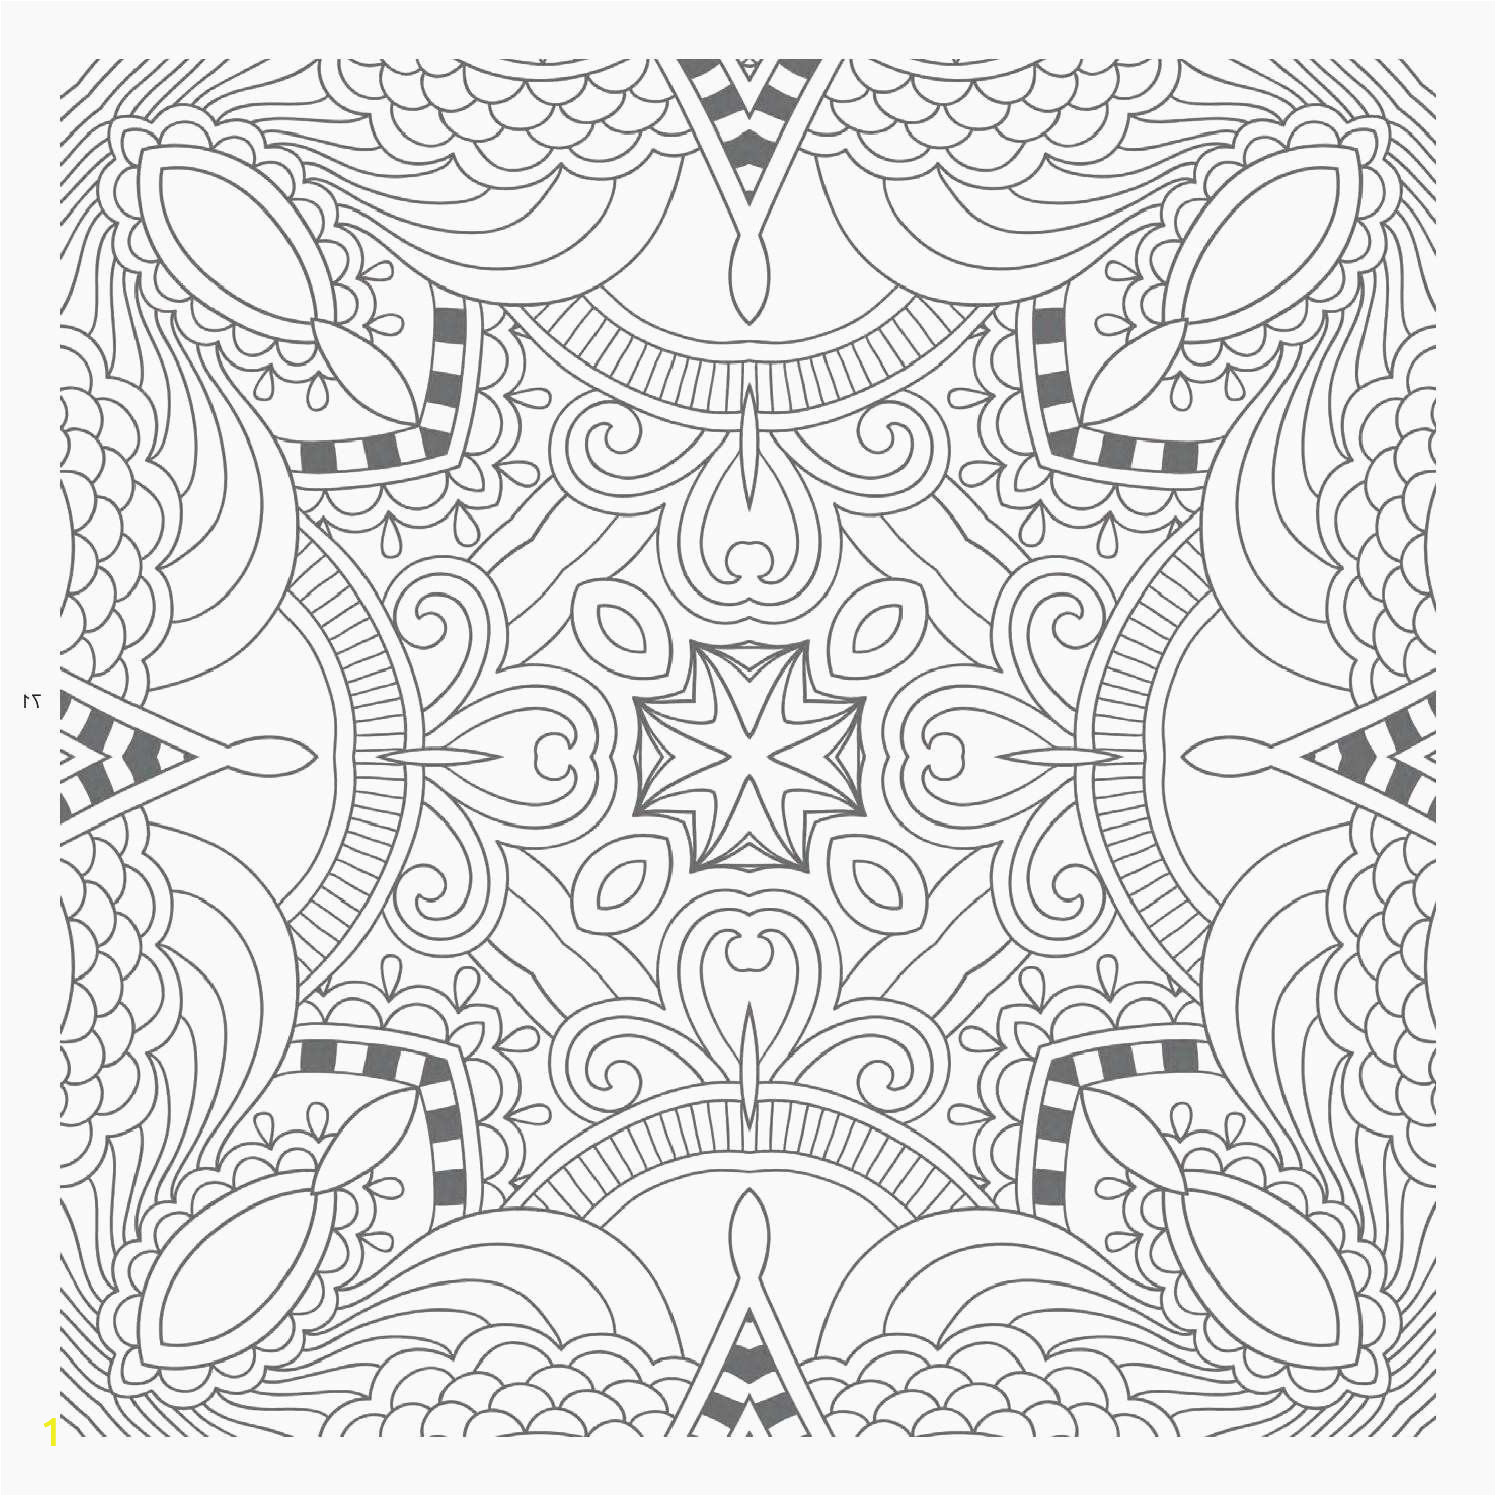 Print Off Coloring Pages for Adults 30 Elegant Gallery Printable Coloring Page for Adults